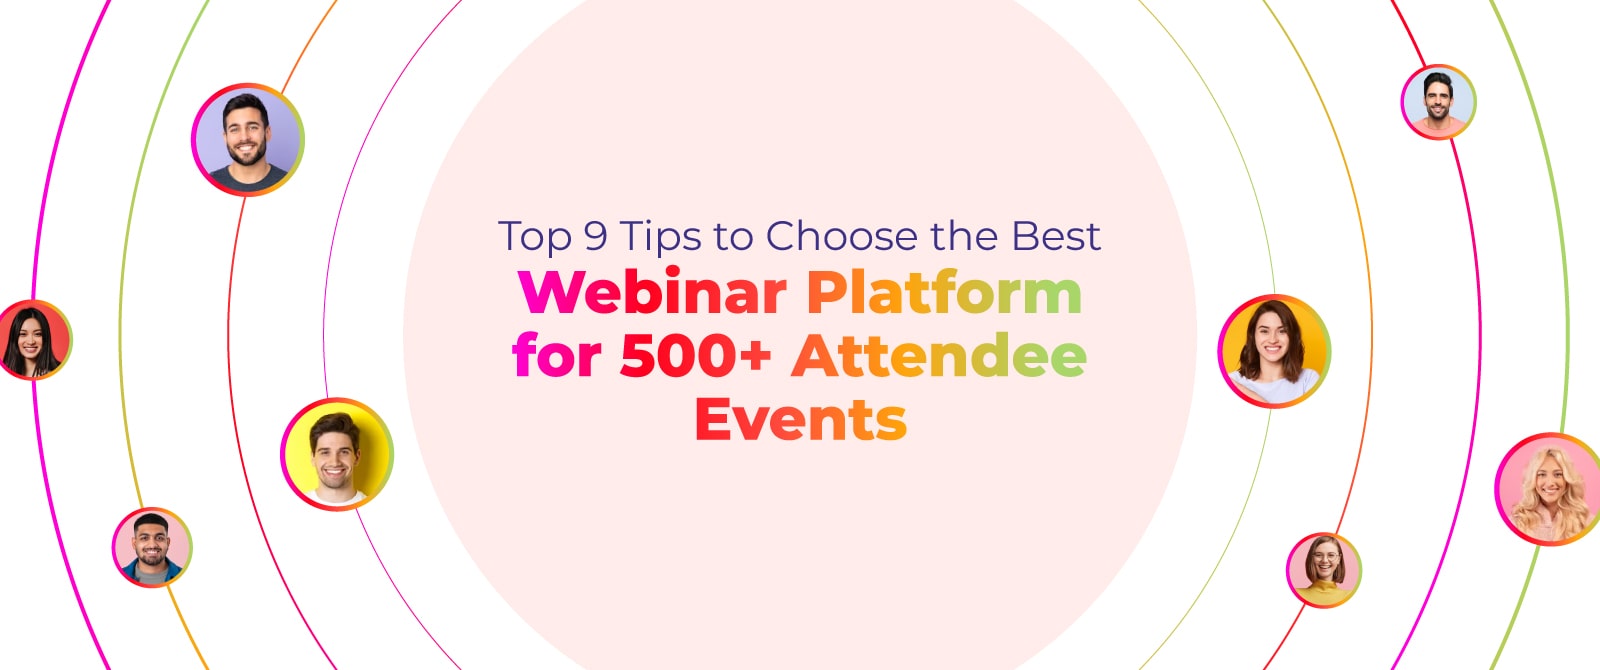 Top 9 Tips to Choose the Best Webinar Platform for 500+ Attendee Events